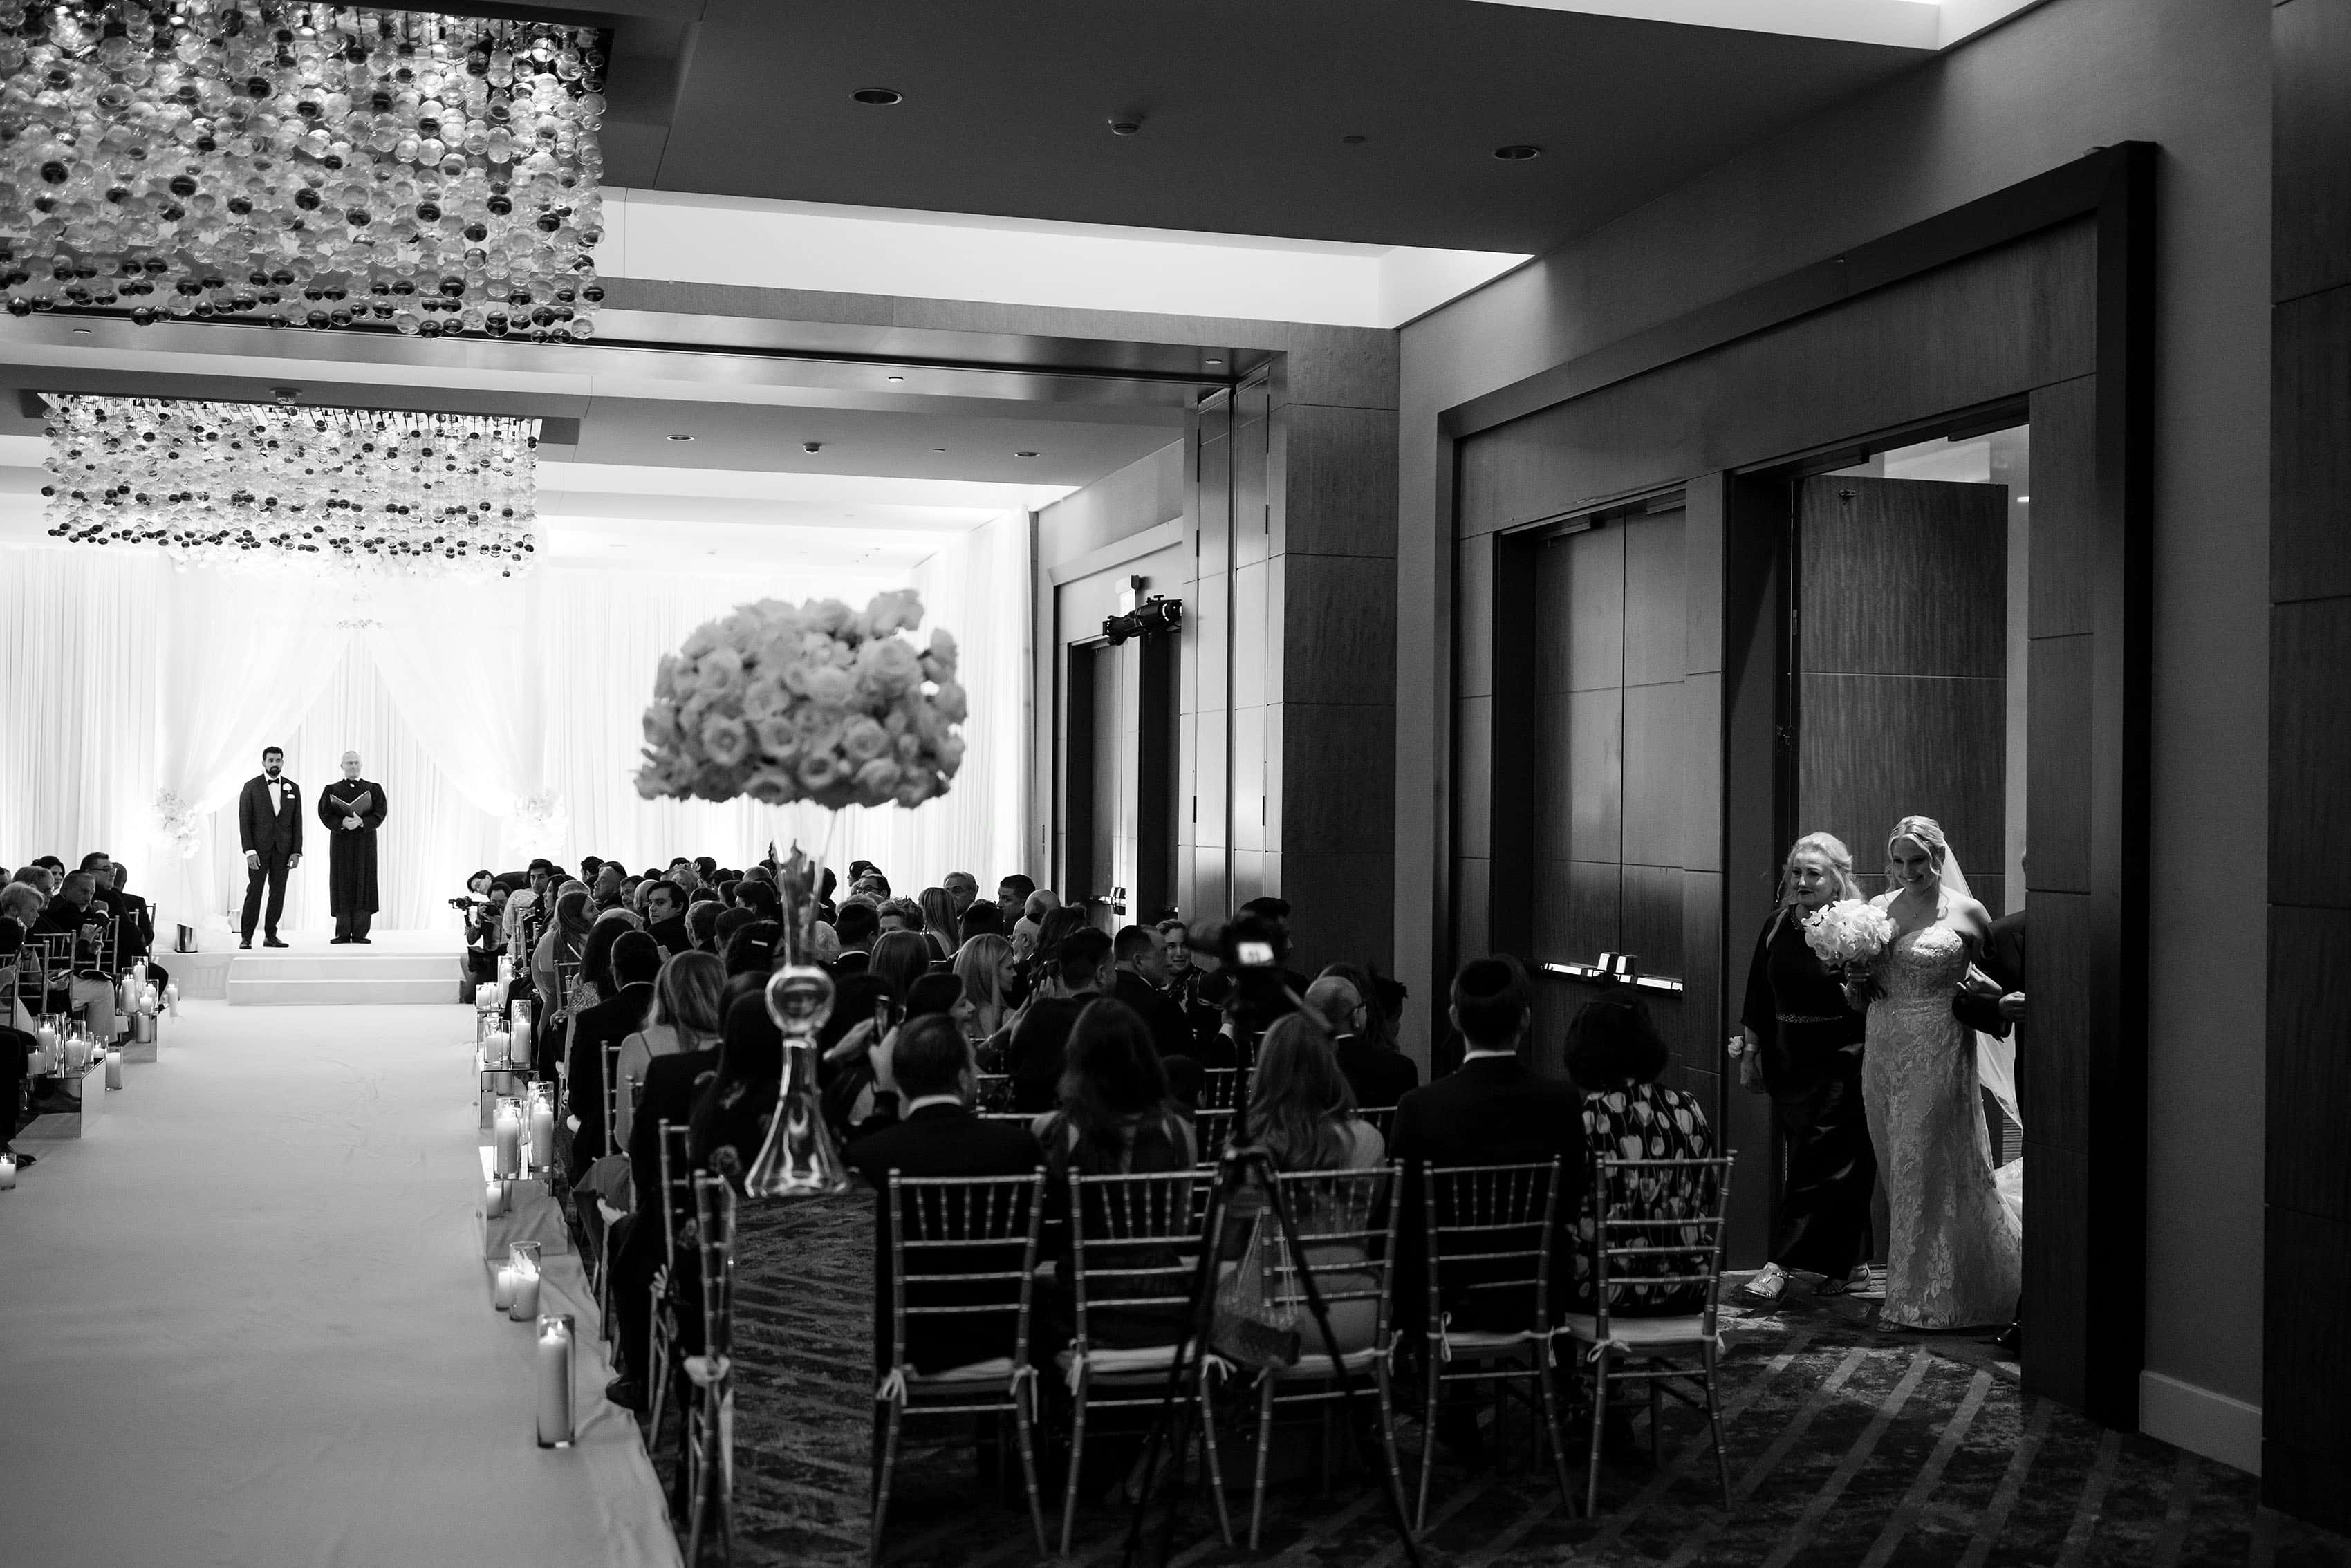 The bride enters the ballroom during the ceremony at Four Seasons Hotel Denver